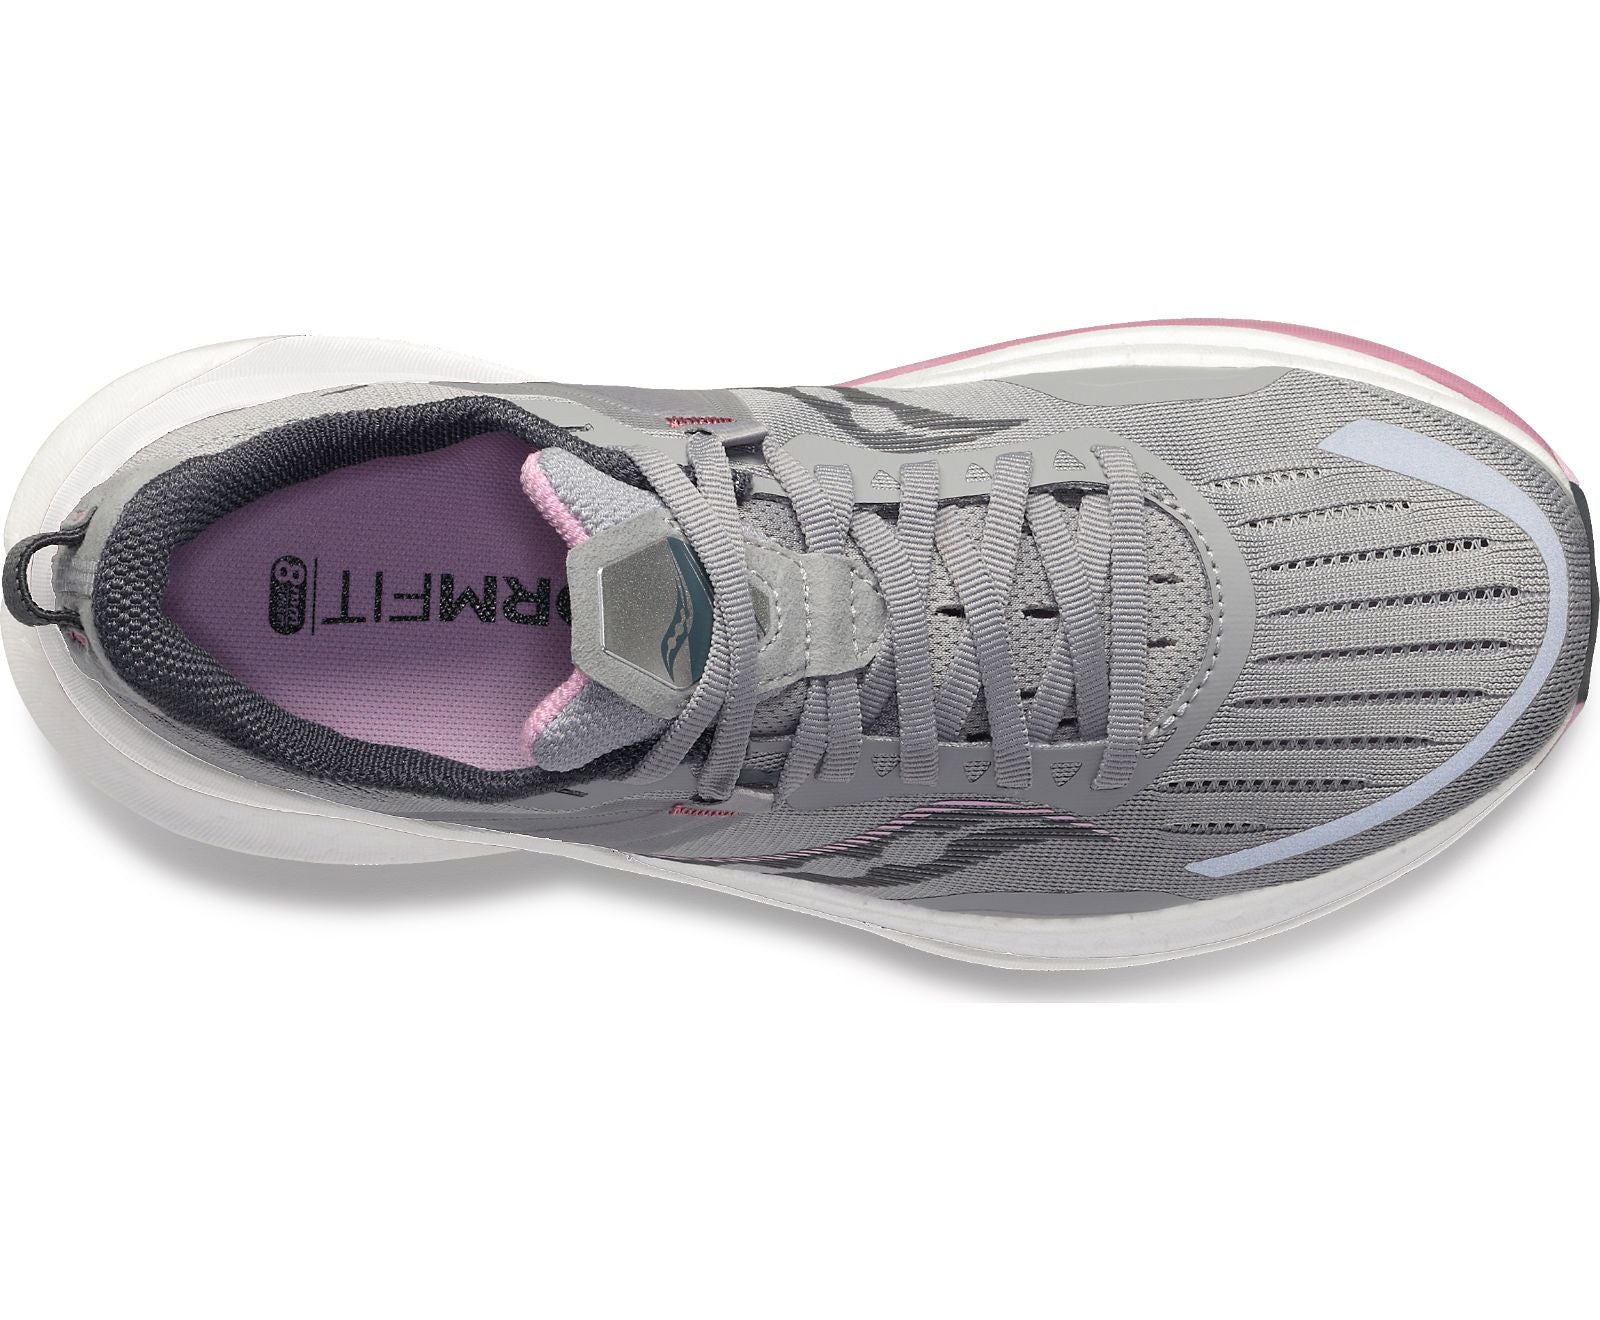 Top view of the Women's Tempus in the wide "D" width by Saucony in the color Alloy/Quartz